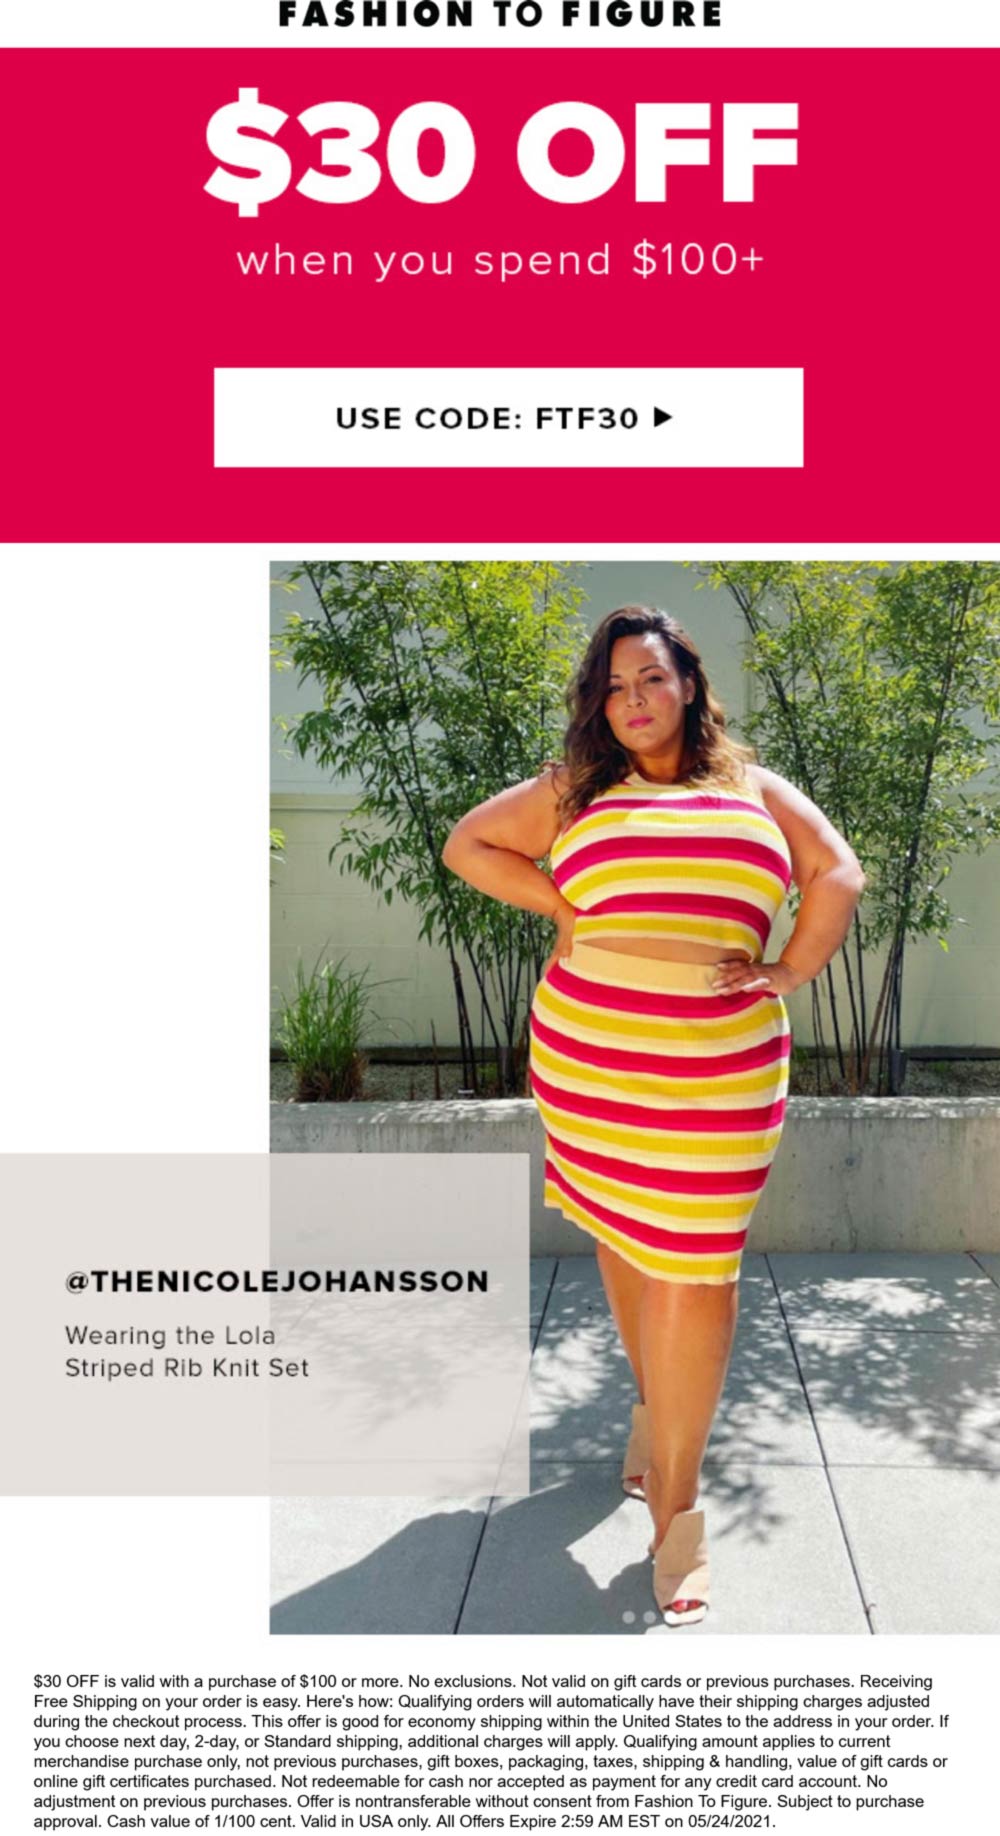 Fashion to Figure stores Coupon  $30 off $100 today at Fashion to Figure via promo code FTF30 #fashiontofigure 